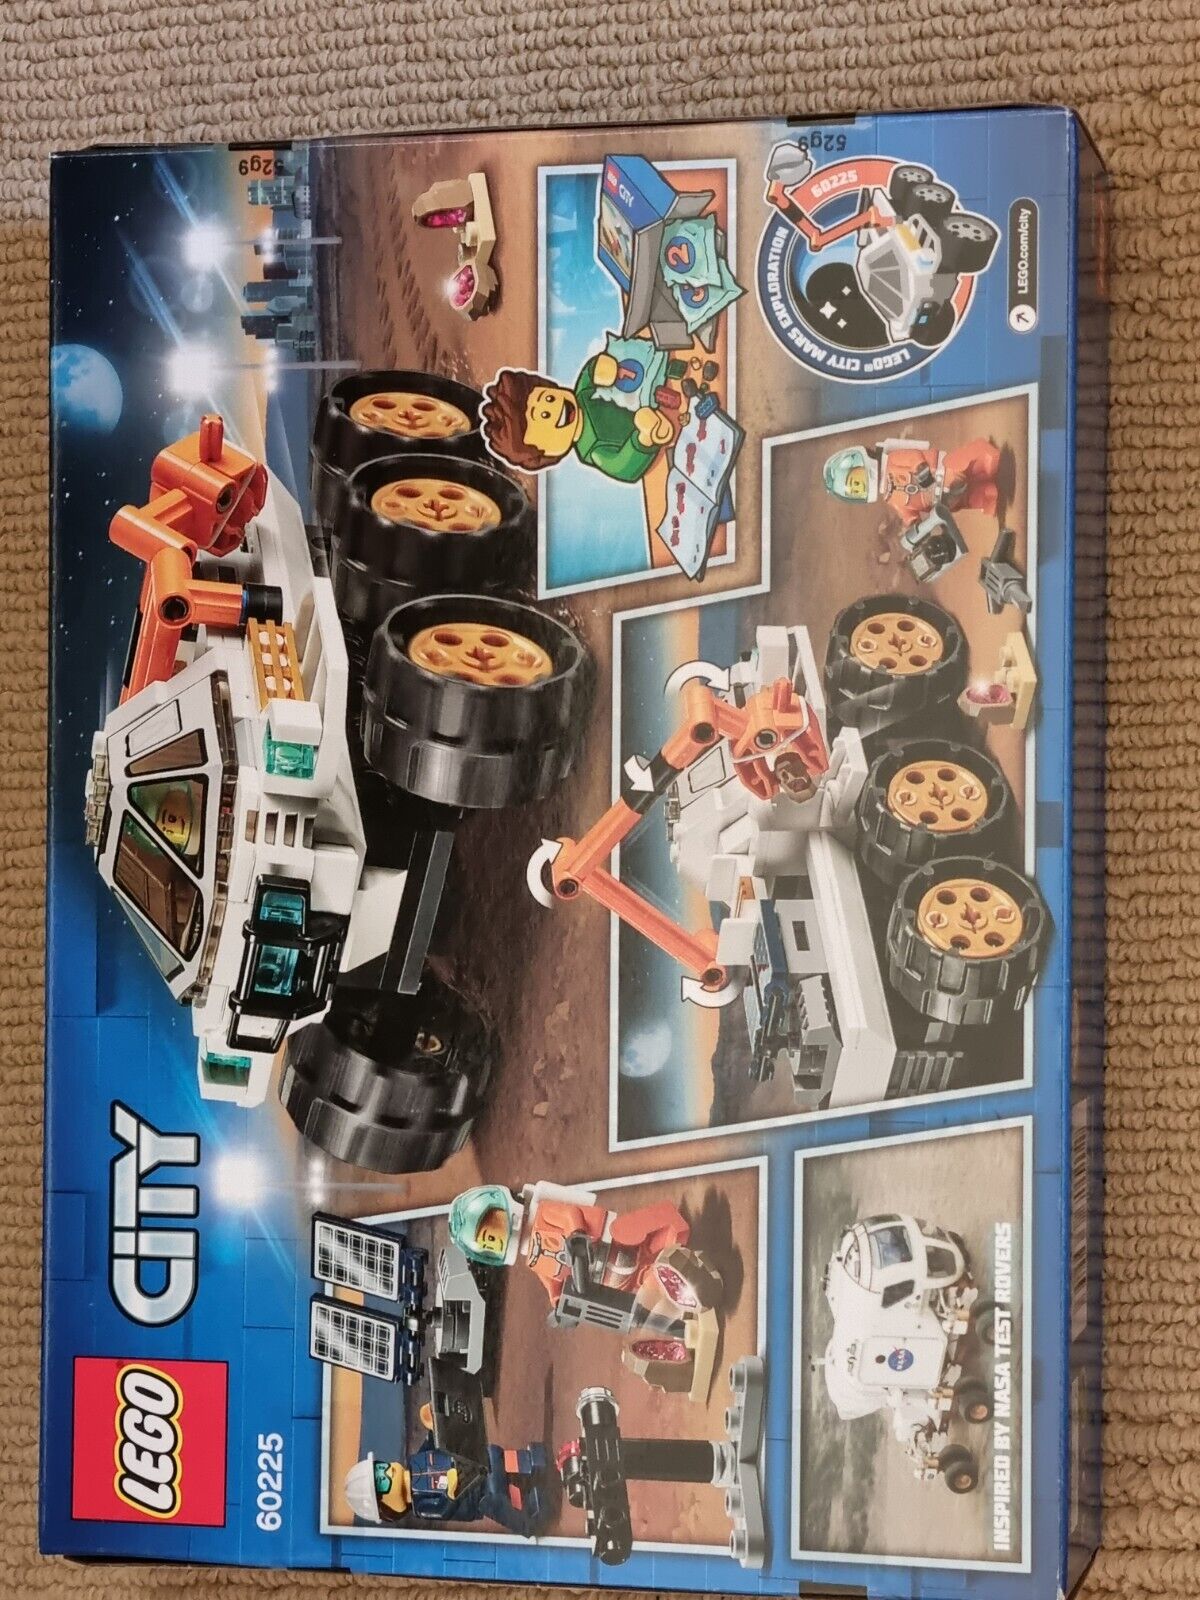 Lego City Rover Testing Drive SPACE MARS MOON Retired LEGO 60225